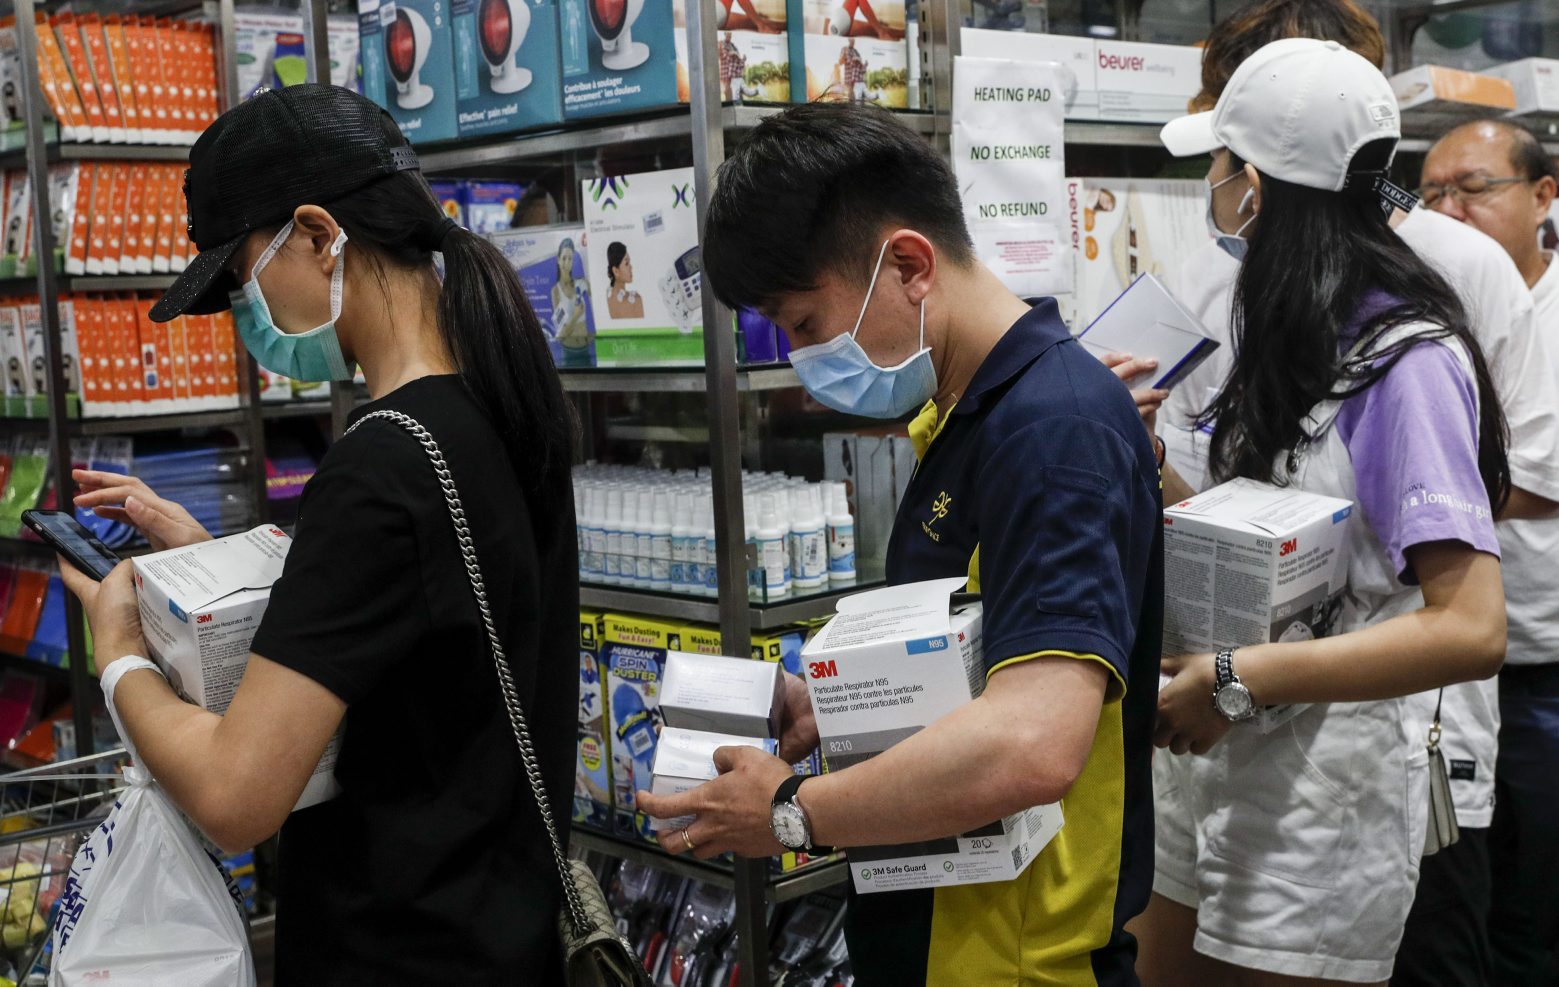 epa08178380 Customers with protective masks hold boxes of N95 masks while waiting in line for the cashier at a shopping mall in Singapore, 30 January 2020. The Ministry of Health has reported a total of ten cases of the Wuhan coronavirus in Singapore, all Chinese nationals hailing from Wuhan. All are reported to be in stable condition. Singapore has announced that they will deny entry and transit to visitors who have travelled to Hubei province and will step up measures to detect and contain the spread, such as enhanced temperature screening. The government will be issuing masks to each household starting 01 February. The Ministry of Education has also imposed a 15 day compulsory leave of absence for students and teachers that have returned from China over the recent Lunar New Year holidays.  EPA/WALLACE WOON SINGAPORE HEALTH CHINA CORONAVIRUS